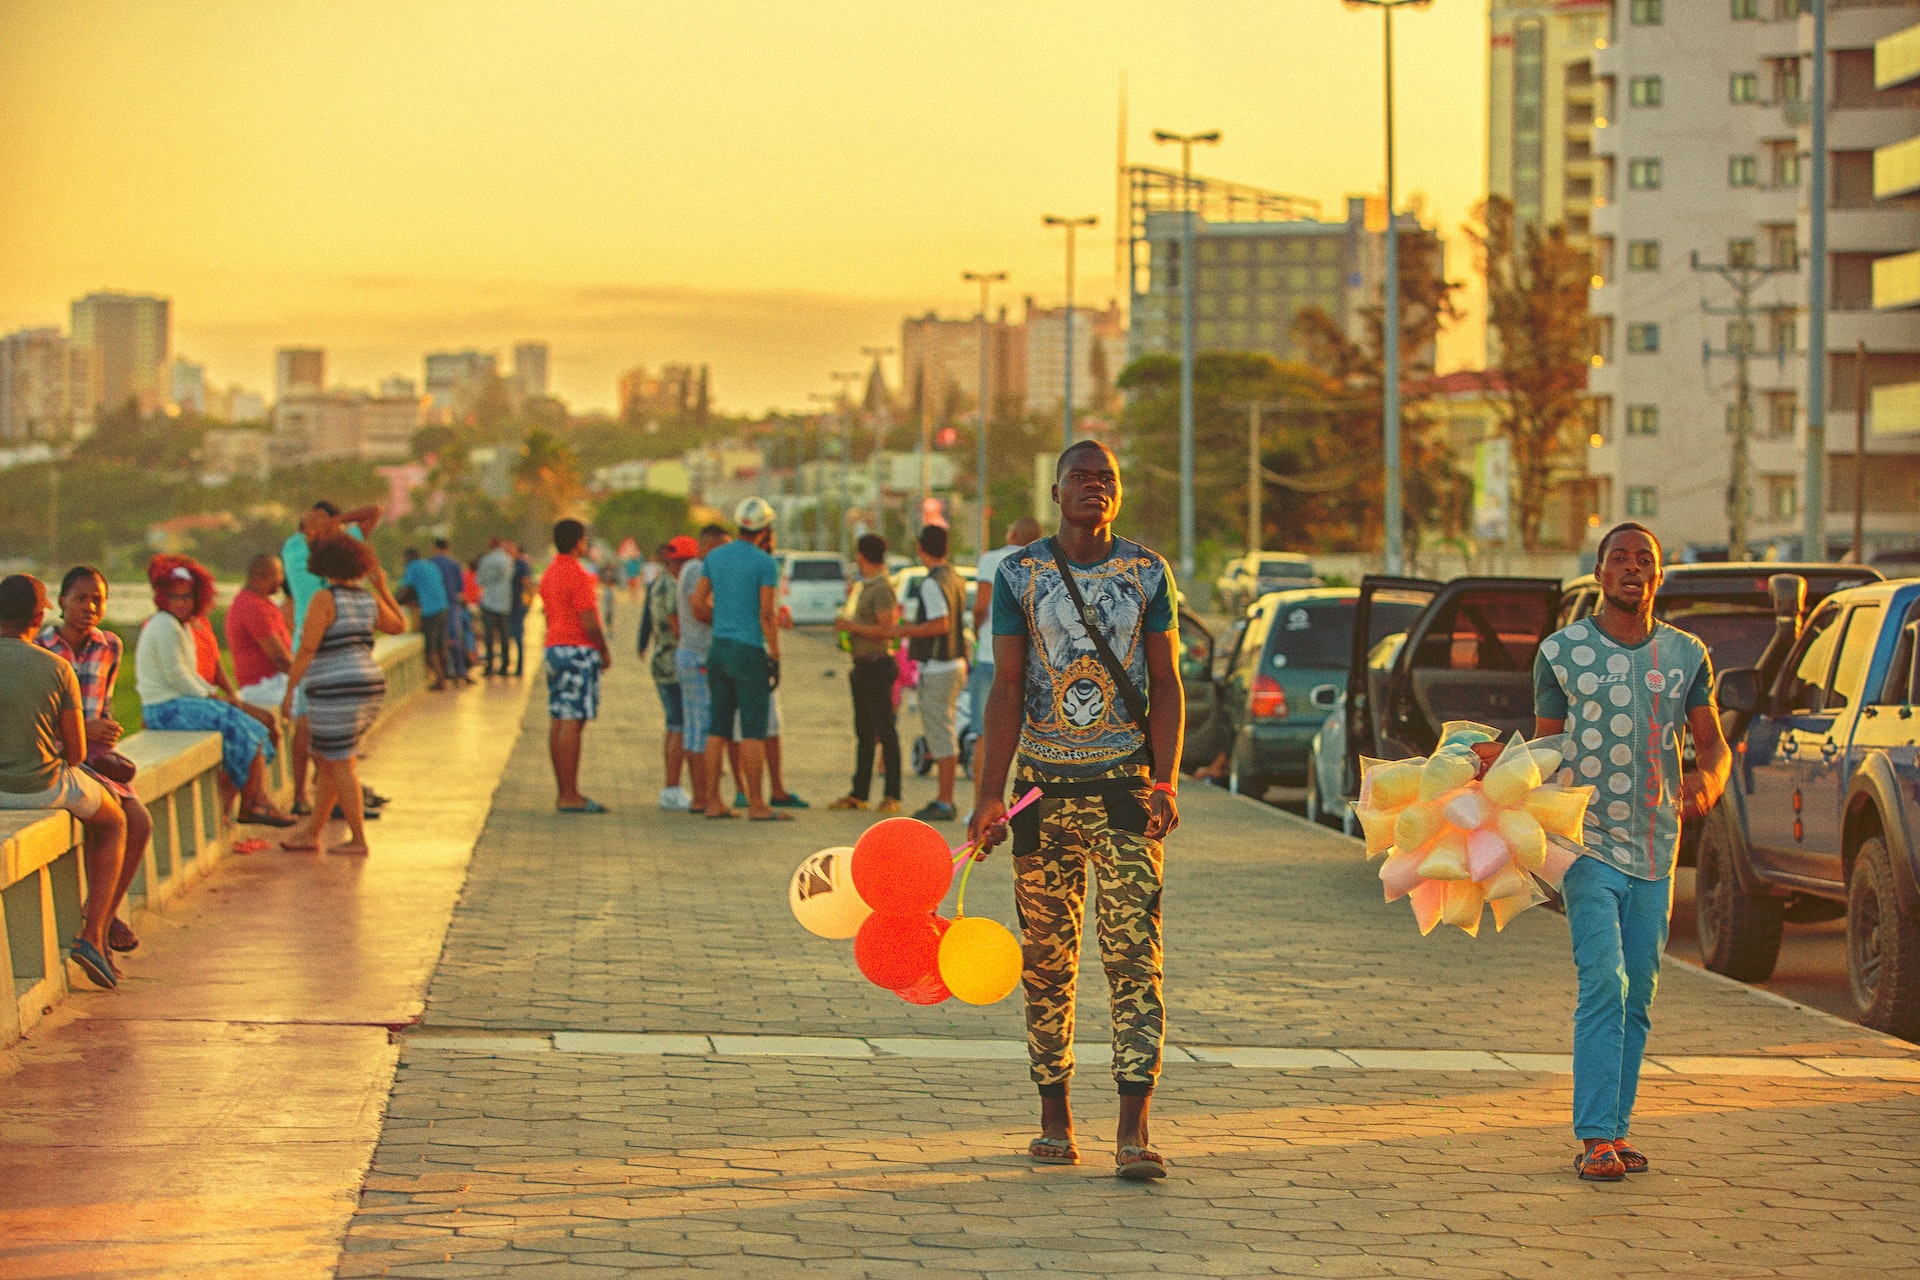 The busy streets of Maputo Mozambique